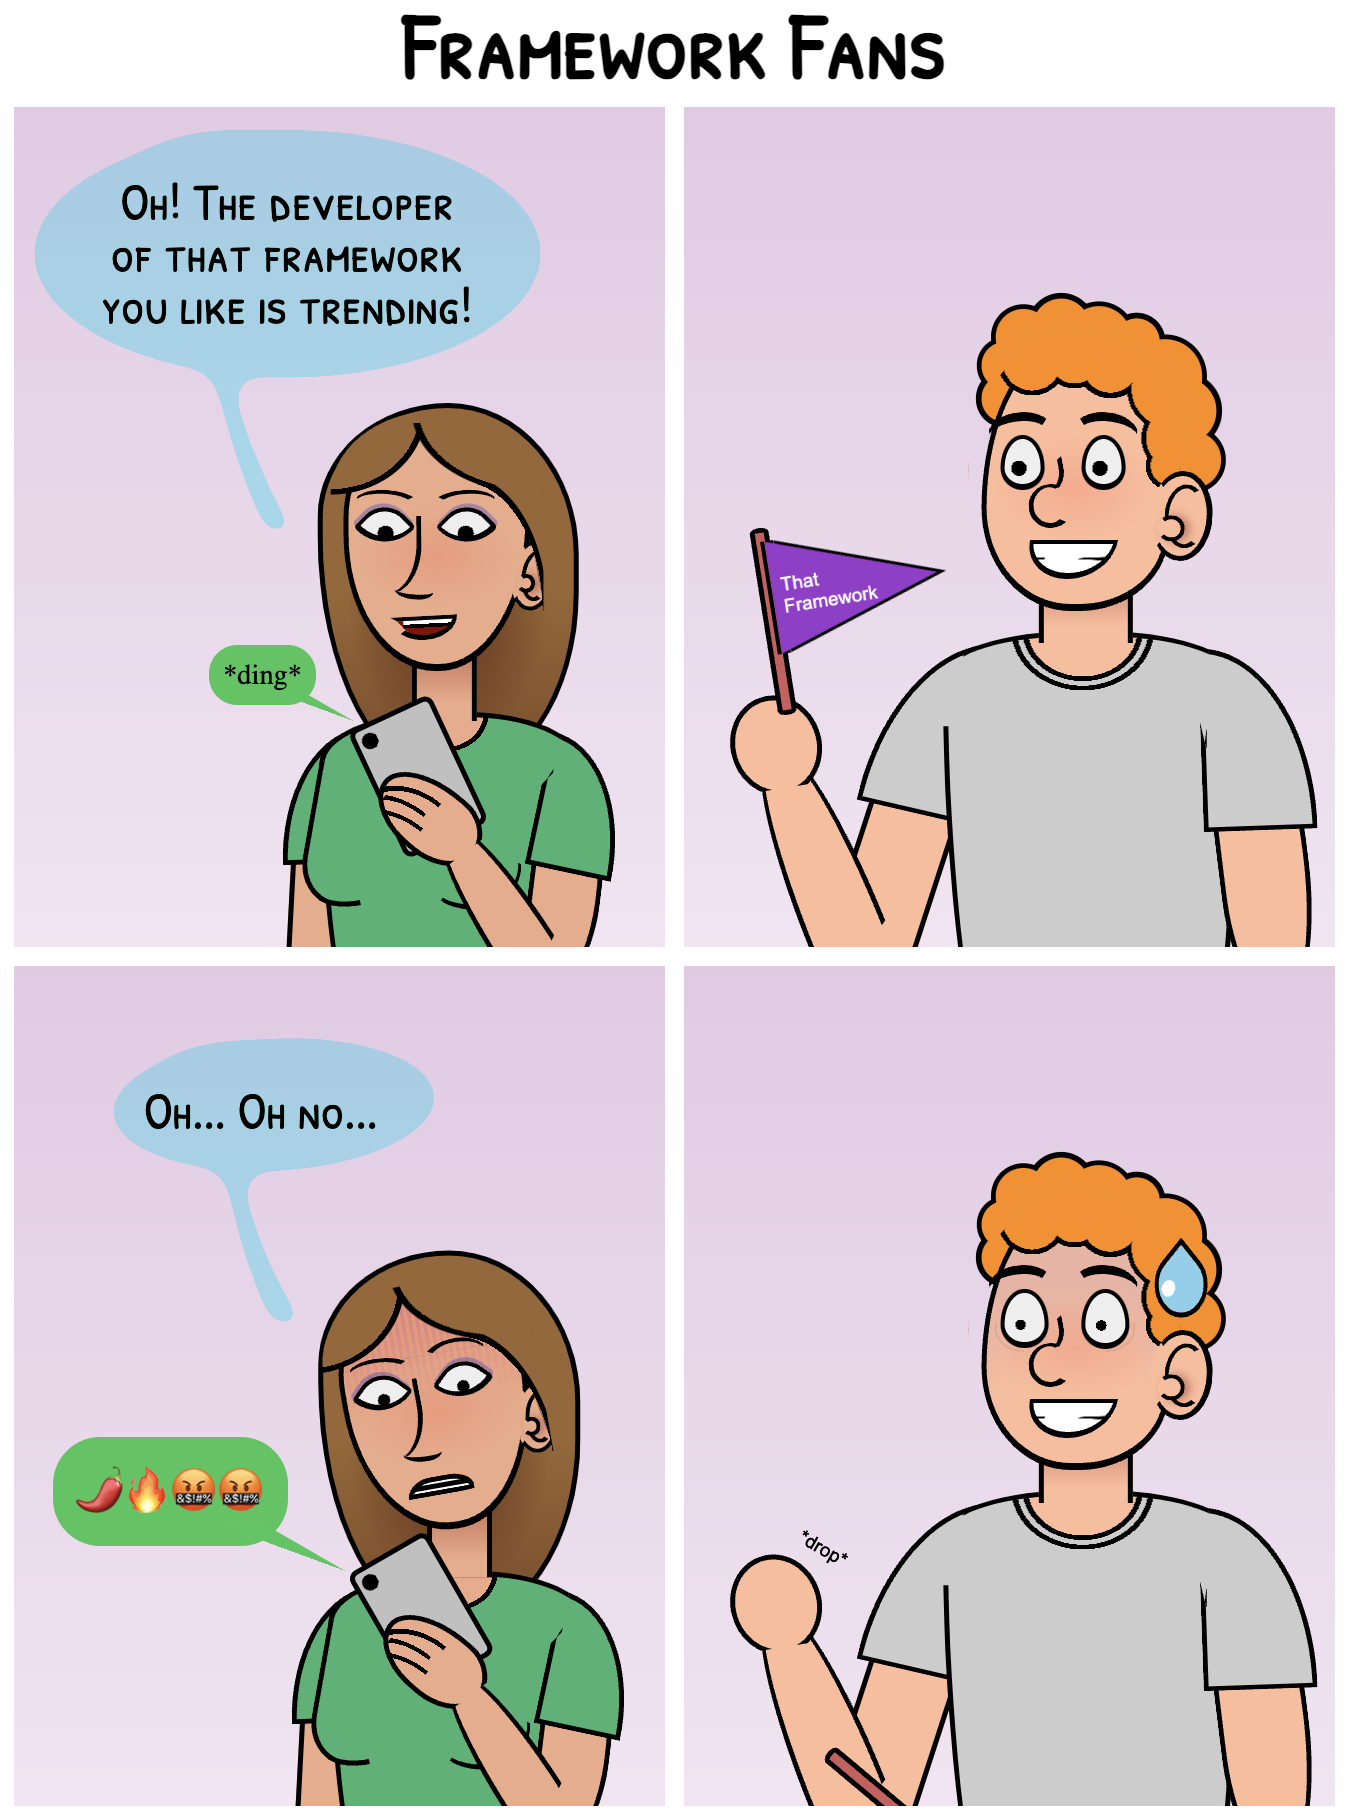 Two versions of the same 4-panel comic showing the same situation: a person receives a message on their phone and says 'Oh! The developer of that framework you like is trending', a second person smiles waving a flag with the text 'That Framework'. Then the first person looks shocked at the phone that shows a message with emojis for fire and angry people 'Oh... Oh no...' says while reading the developer's hot take. The last panel is different in both parts. In the first one (titled Framework Fans), the second person looks shocks and ashamed and drops the flag. In the second one (titled Framework Bros), the second person keeps smiling and now they are waving more flags, with flags coming out of ears and mouth, and even the t-shirt is from That Framework.